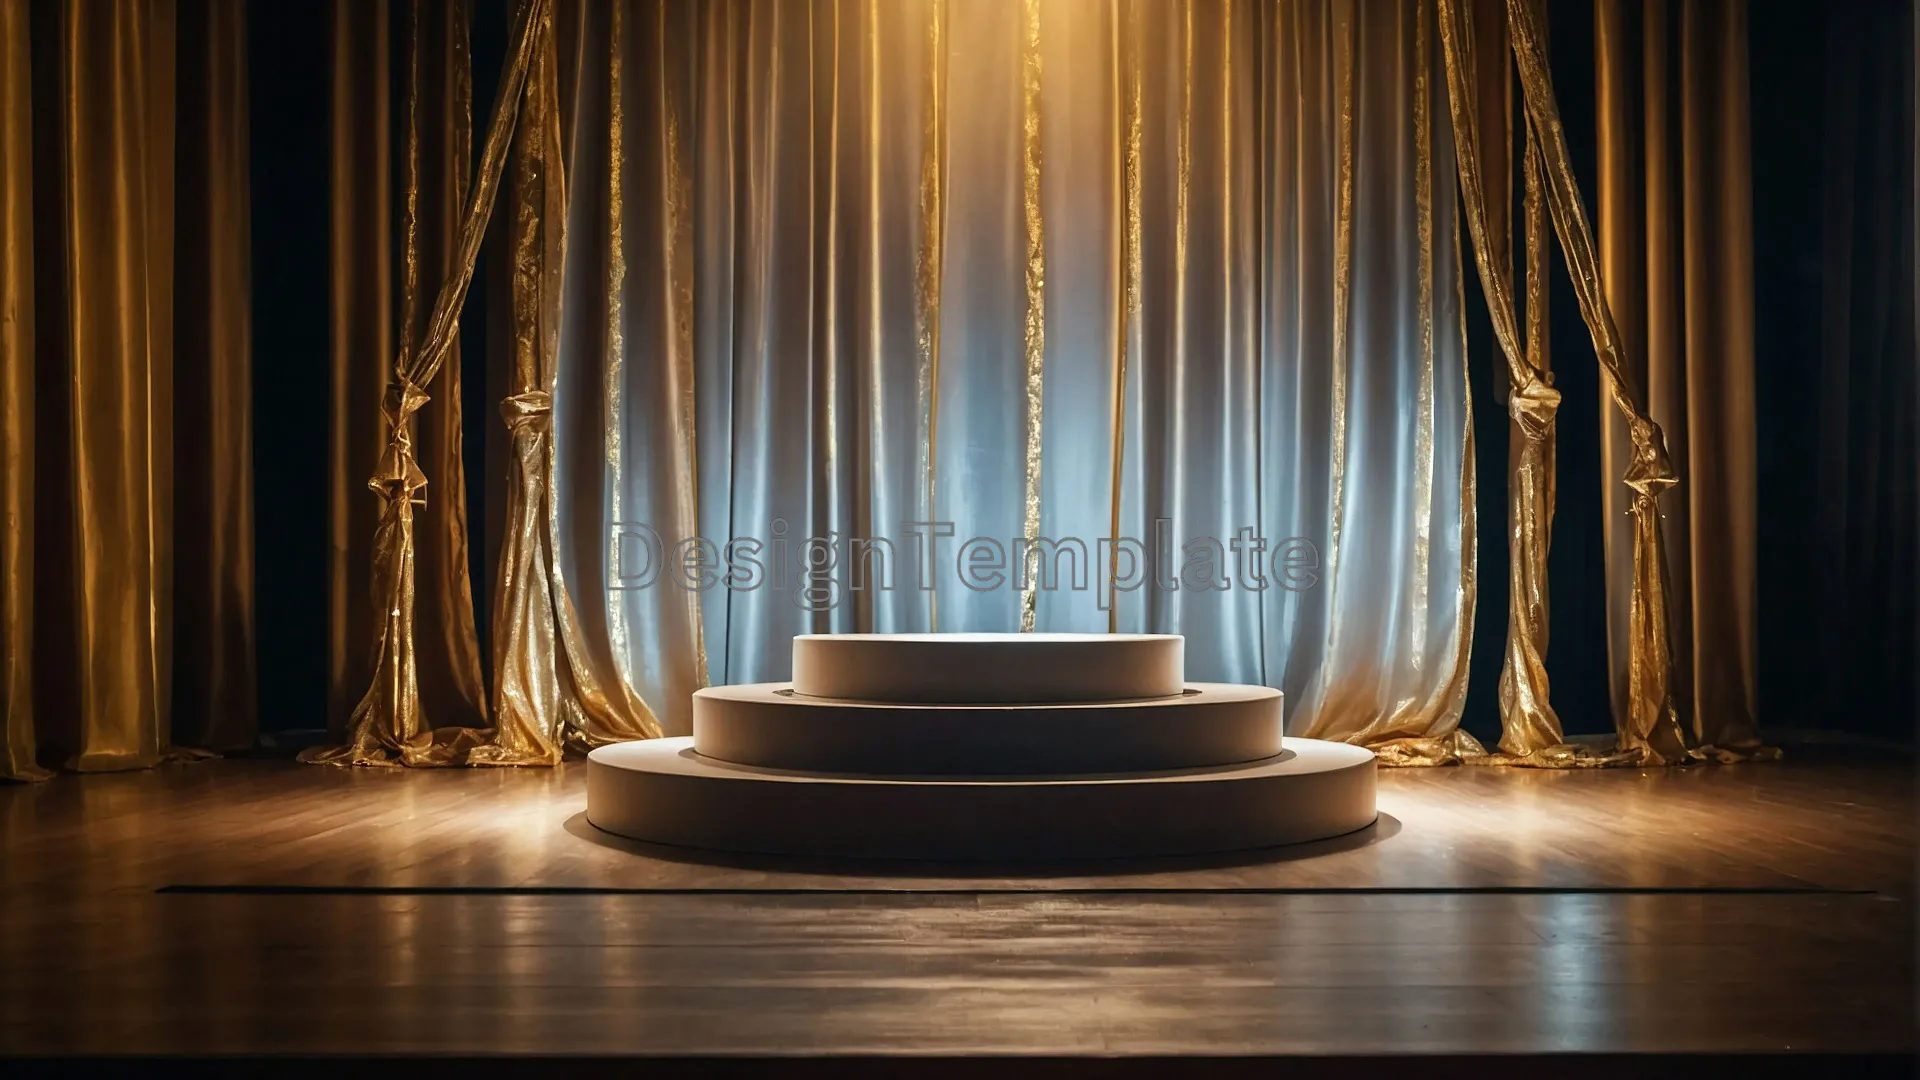 Textured Brilliance Fresh Theme Golden Fabric on Award Show Stage image